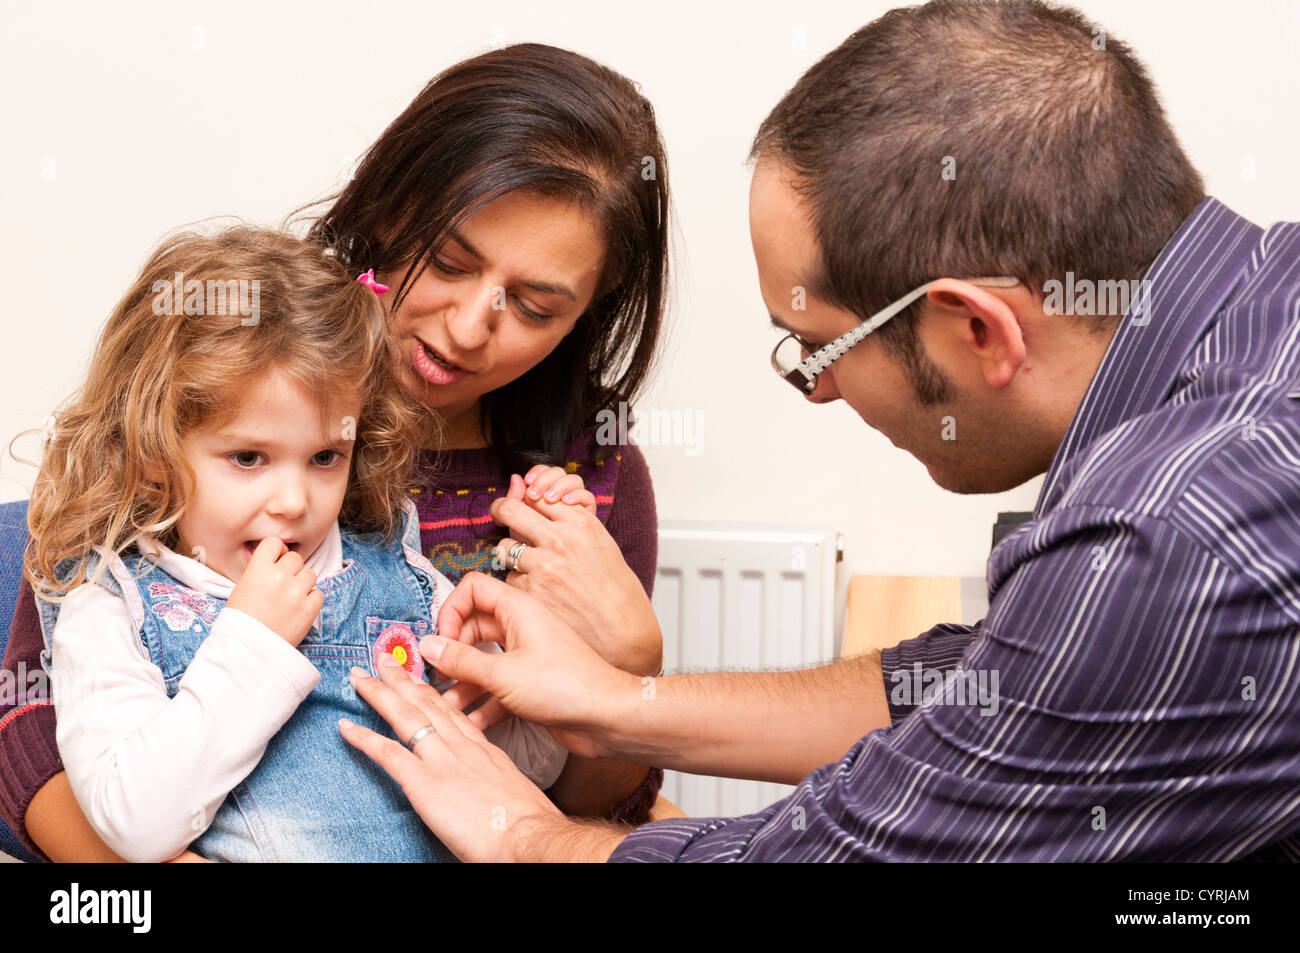 GP Doctor surgery patient consultation with young child who receives a bravery sticker. Stock Photo